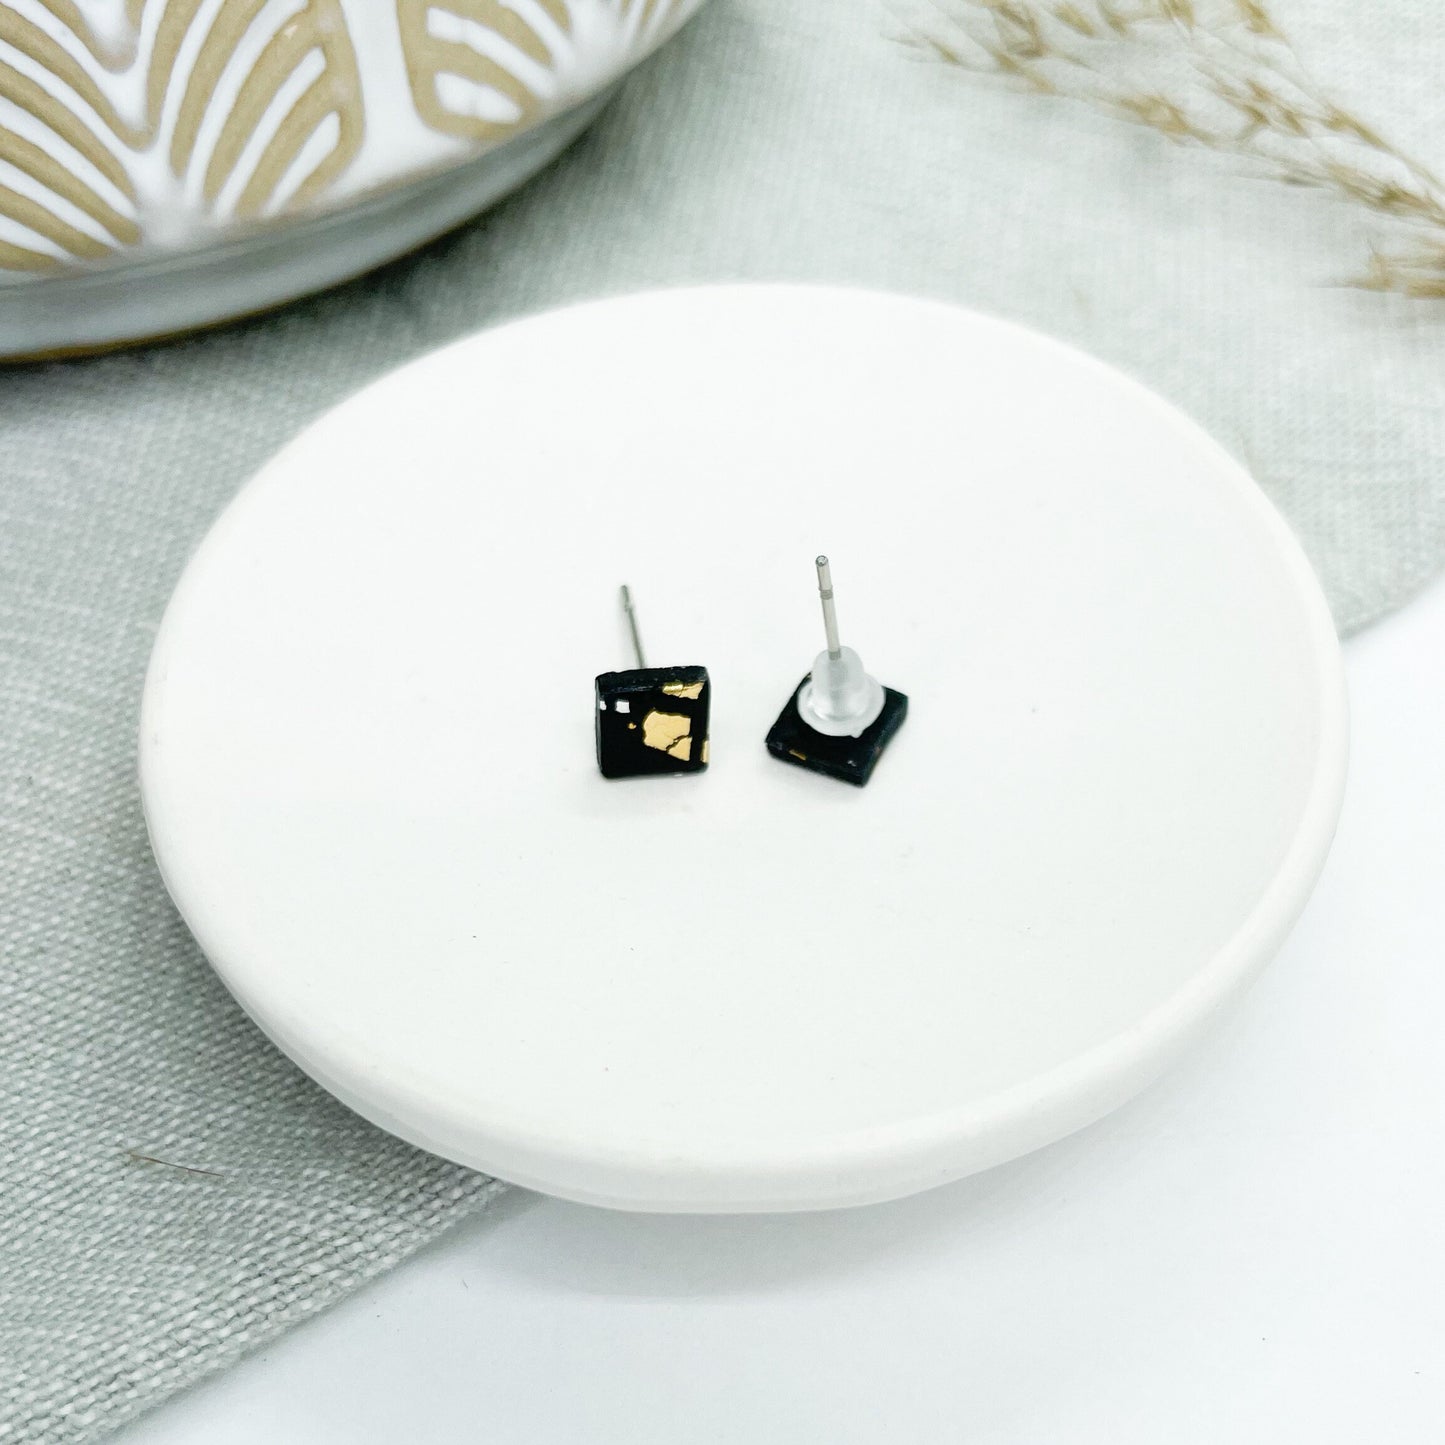 Polymer clay earrings, tiny polymer clay studs in black with silver and gold leaf, postbox gift, birthday gift for her